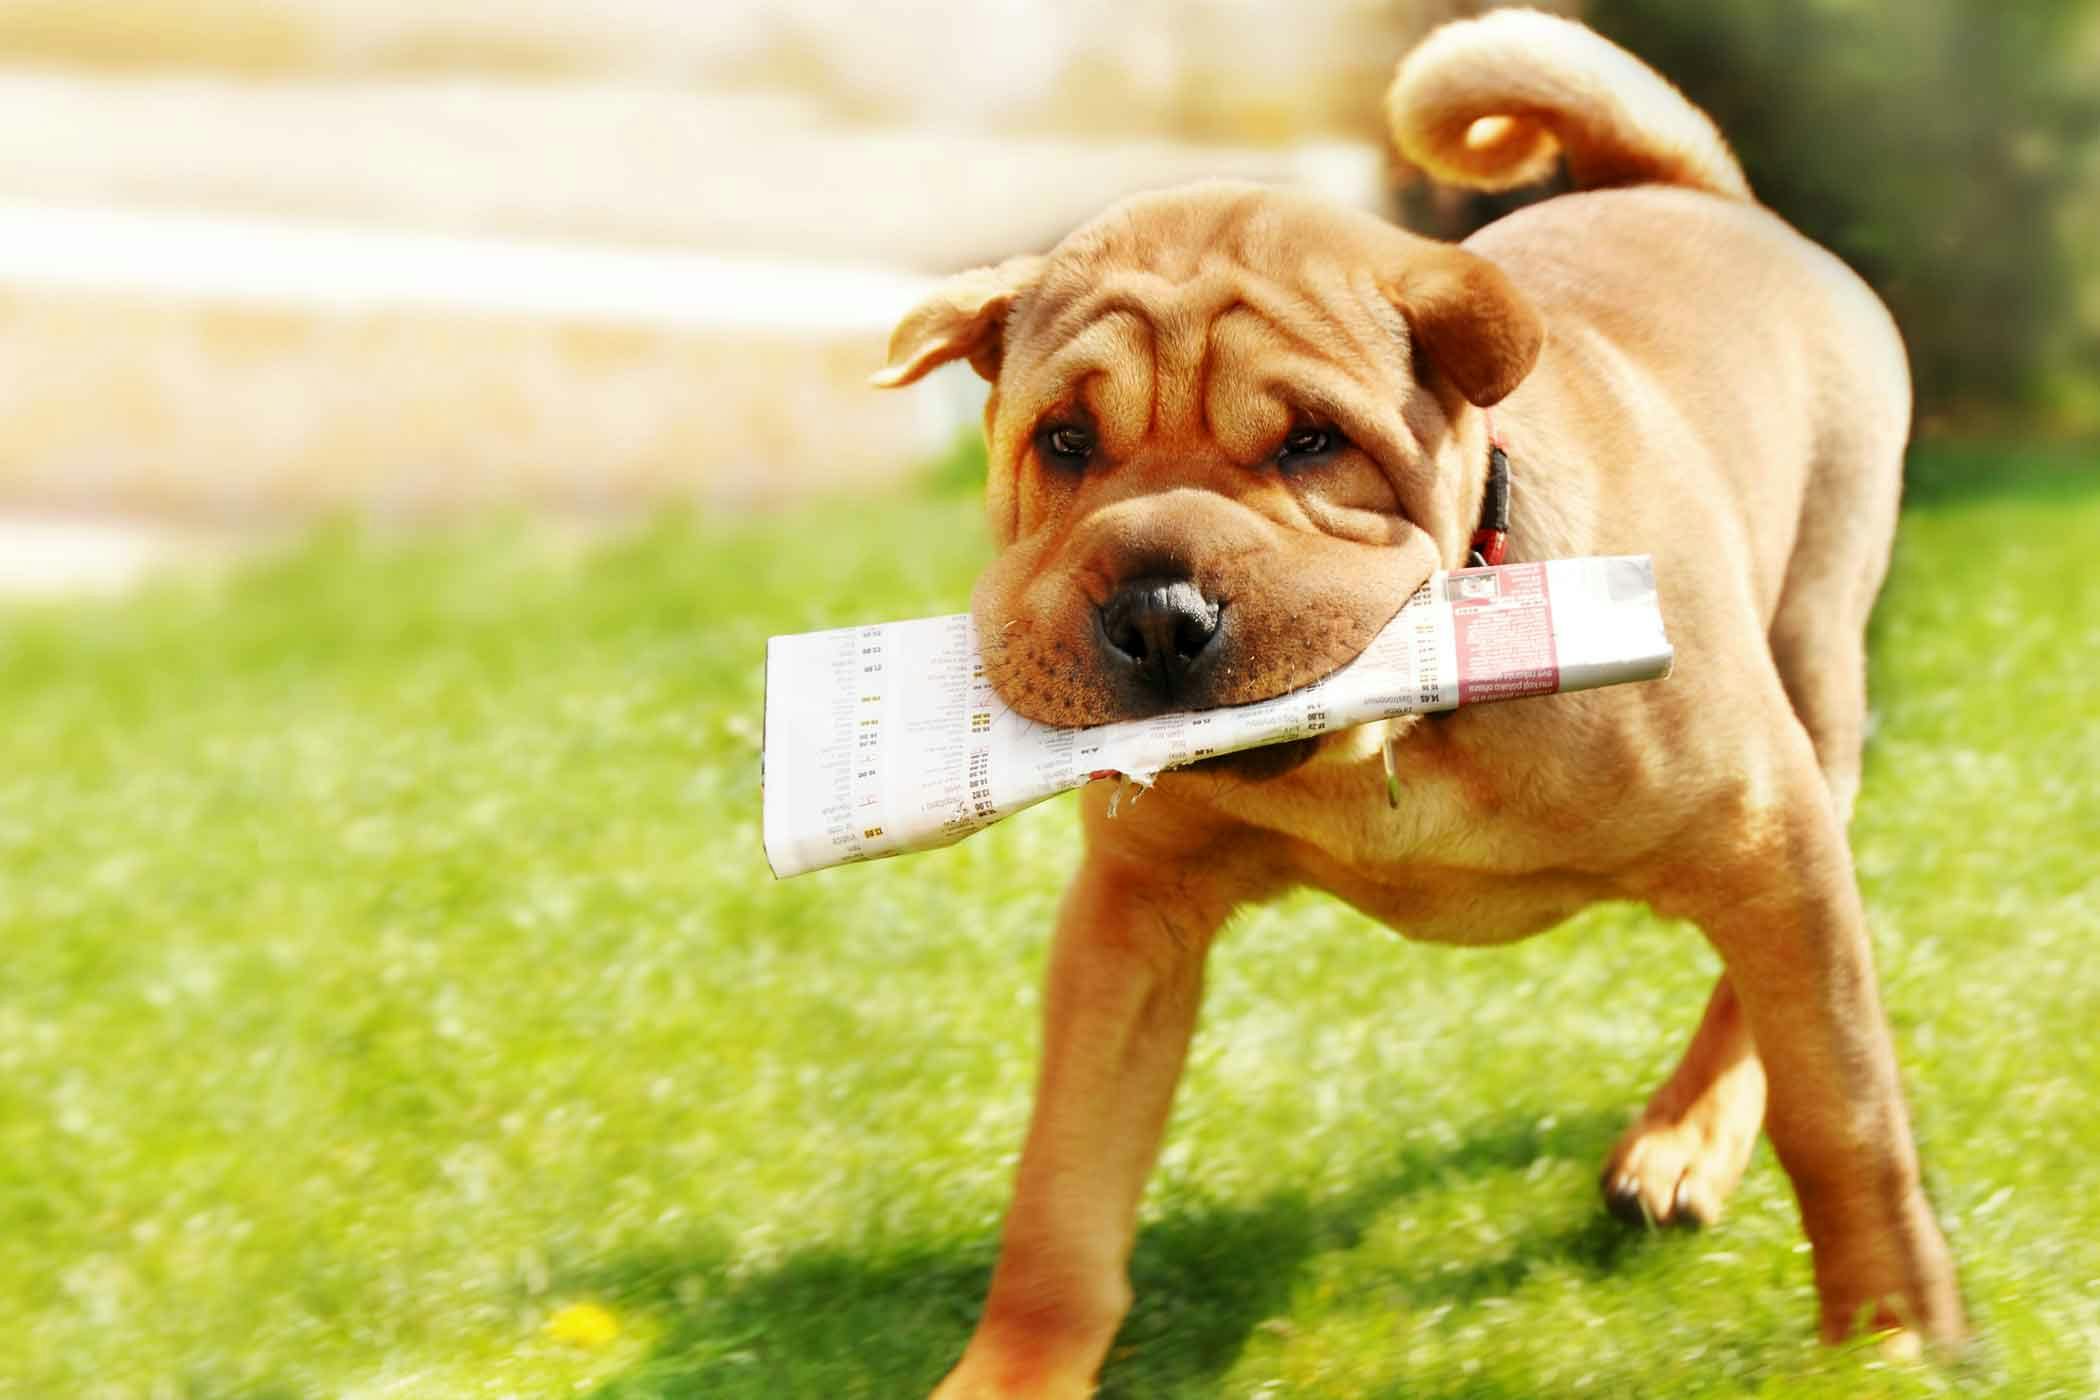 How to Train Your Dog to Poop on Newspaper | Wag!